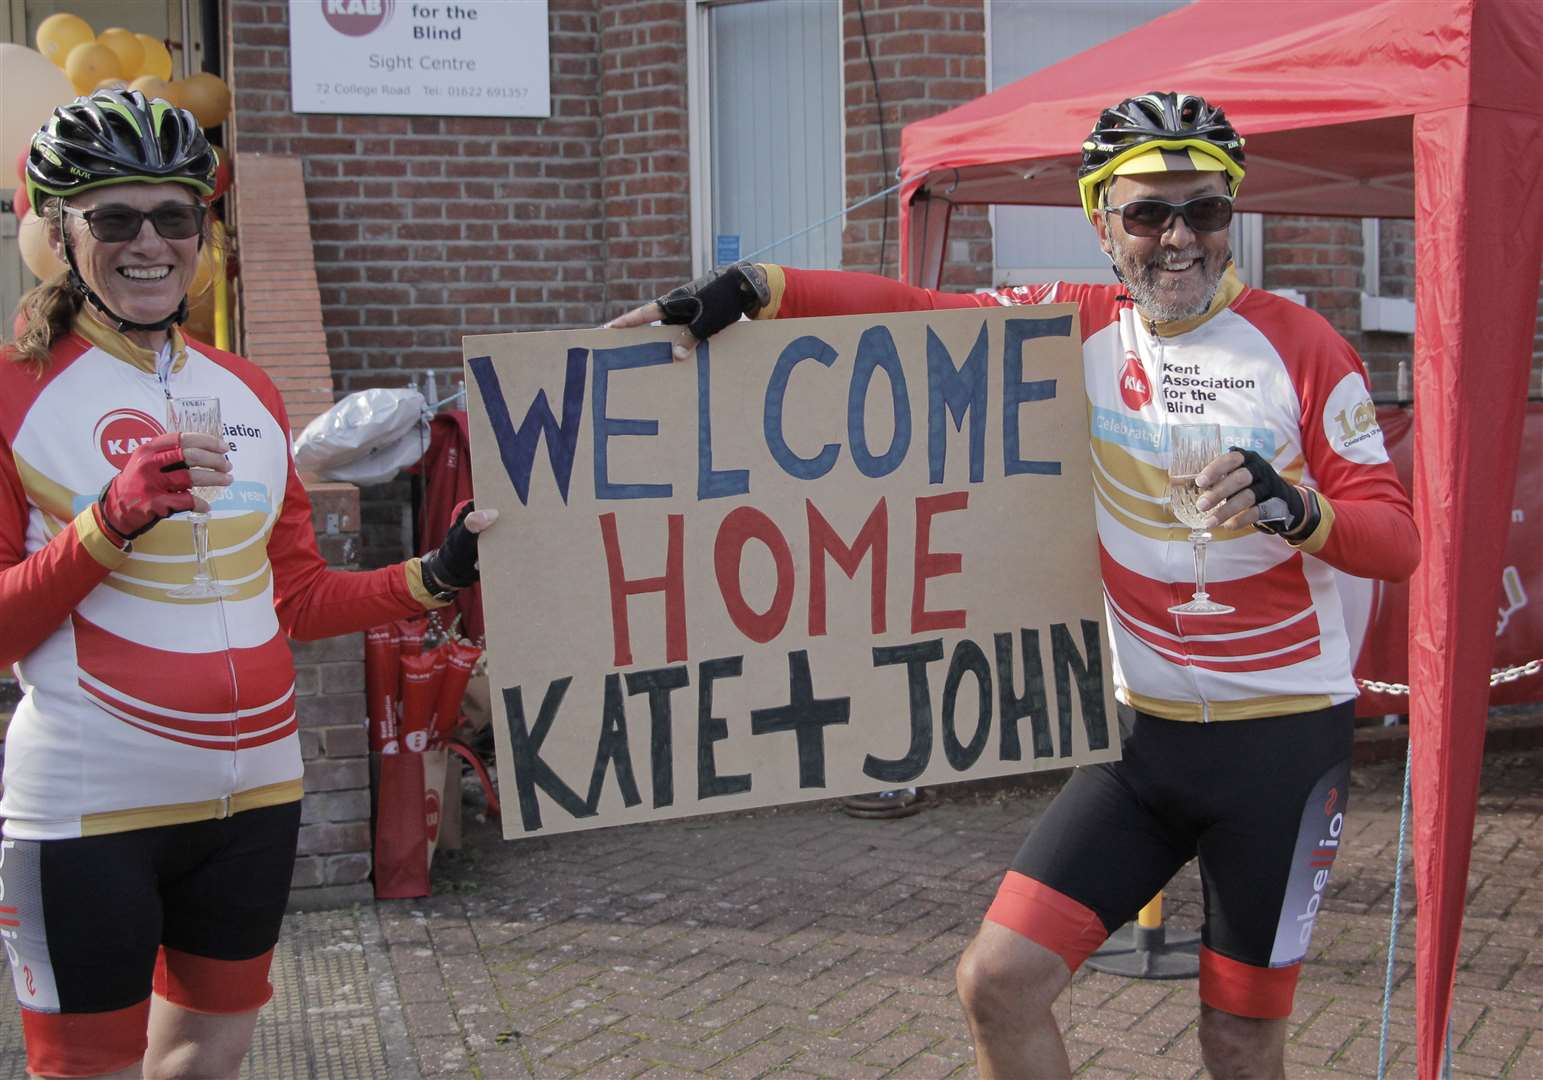 Kate and John were given a warm welcome when they arrived at the Kent Association for the Blind headquarters in Maidstone. Picture: Kent Association for the Blind